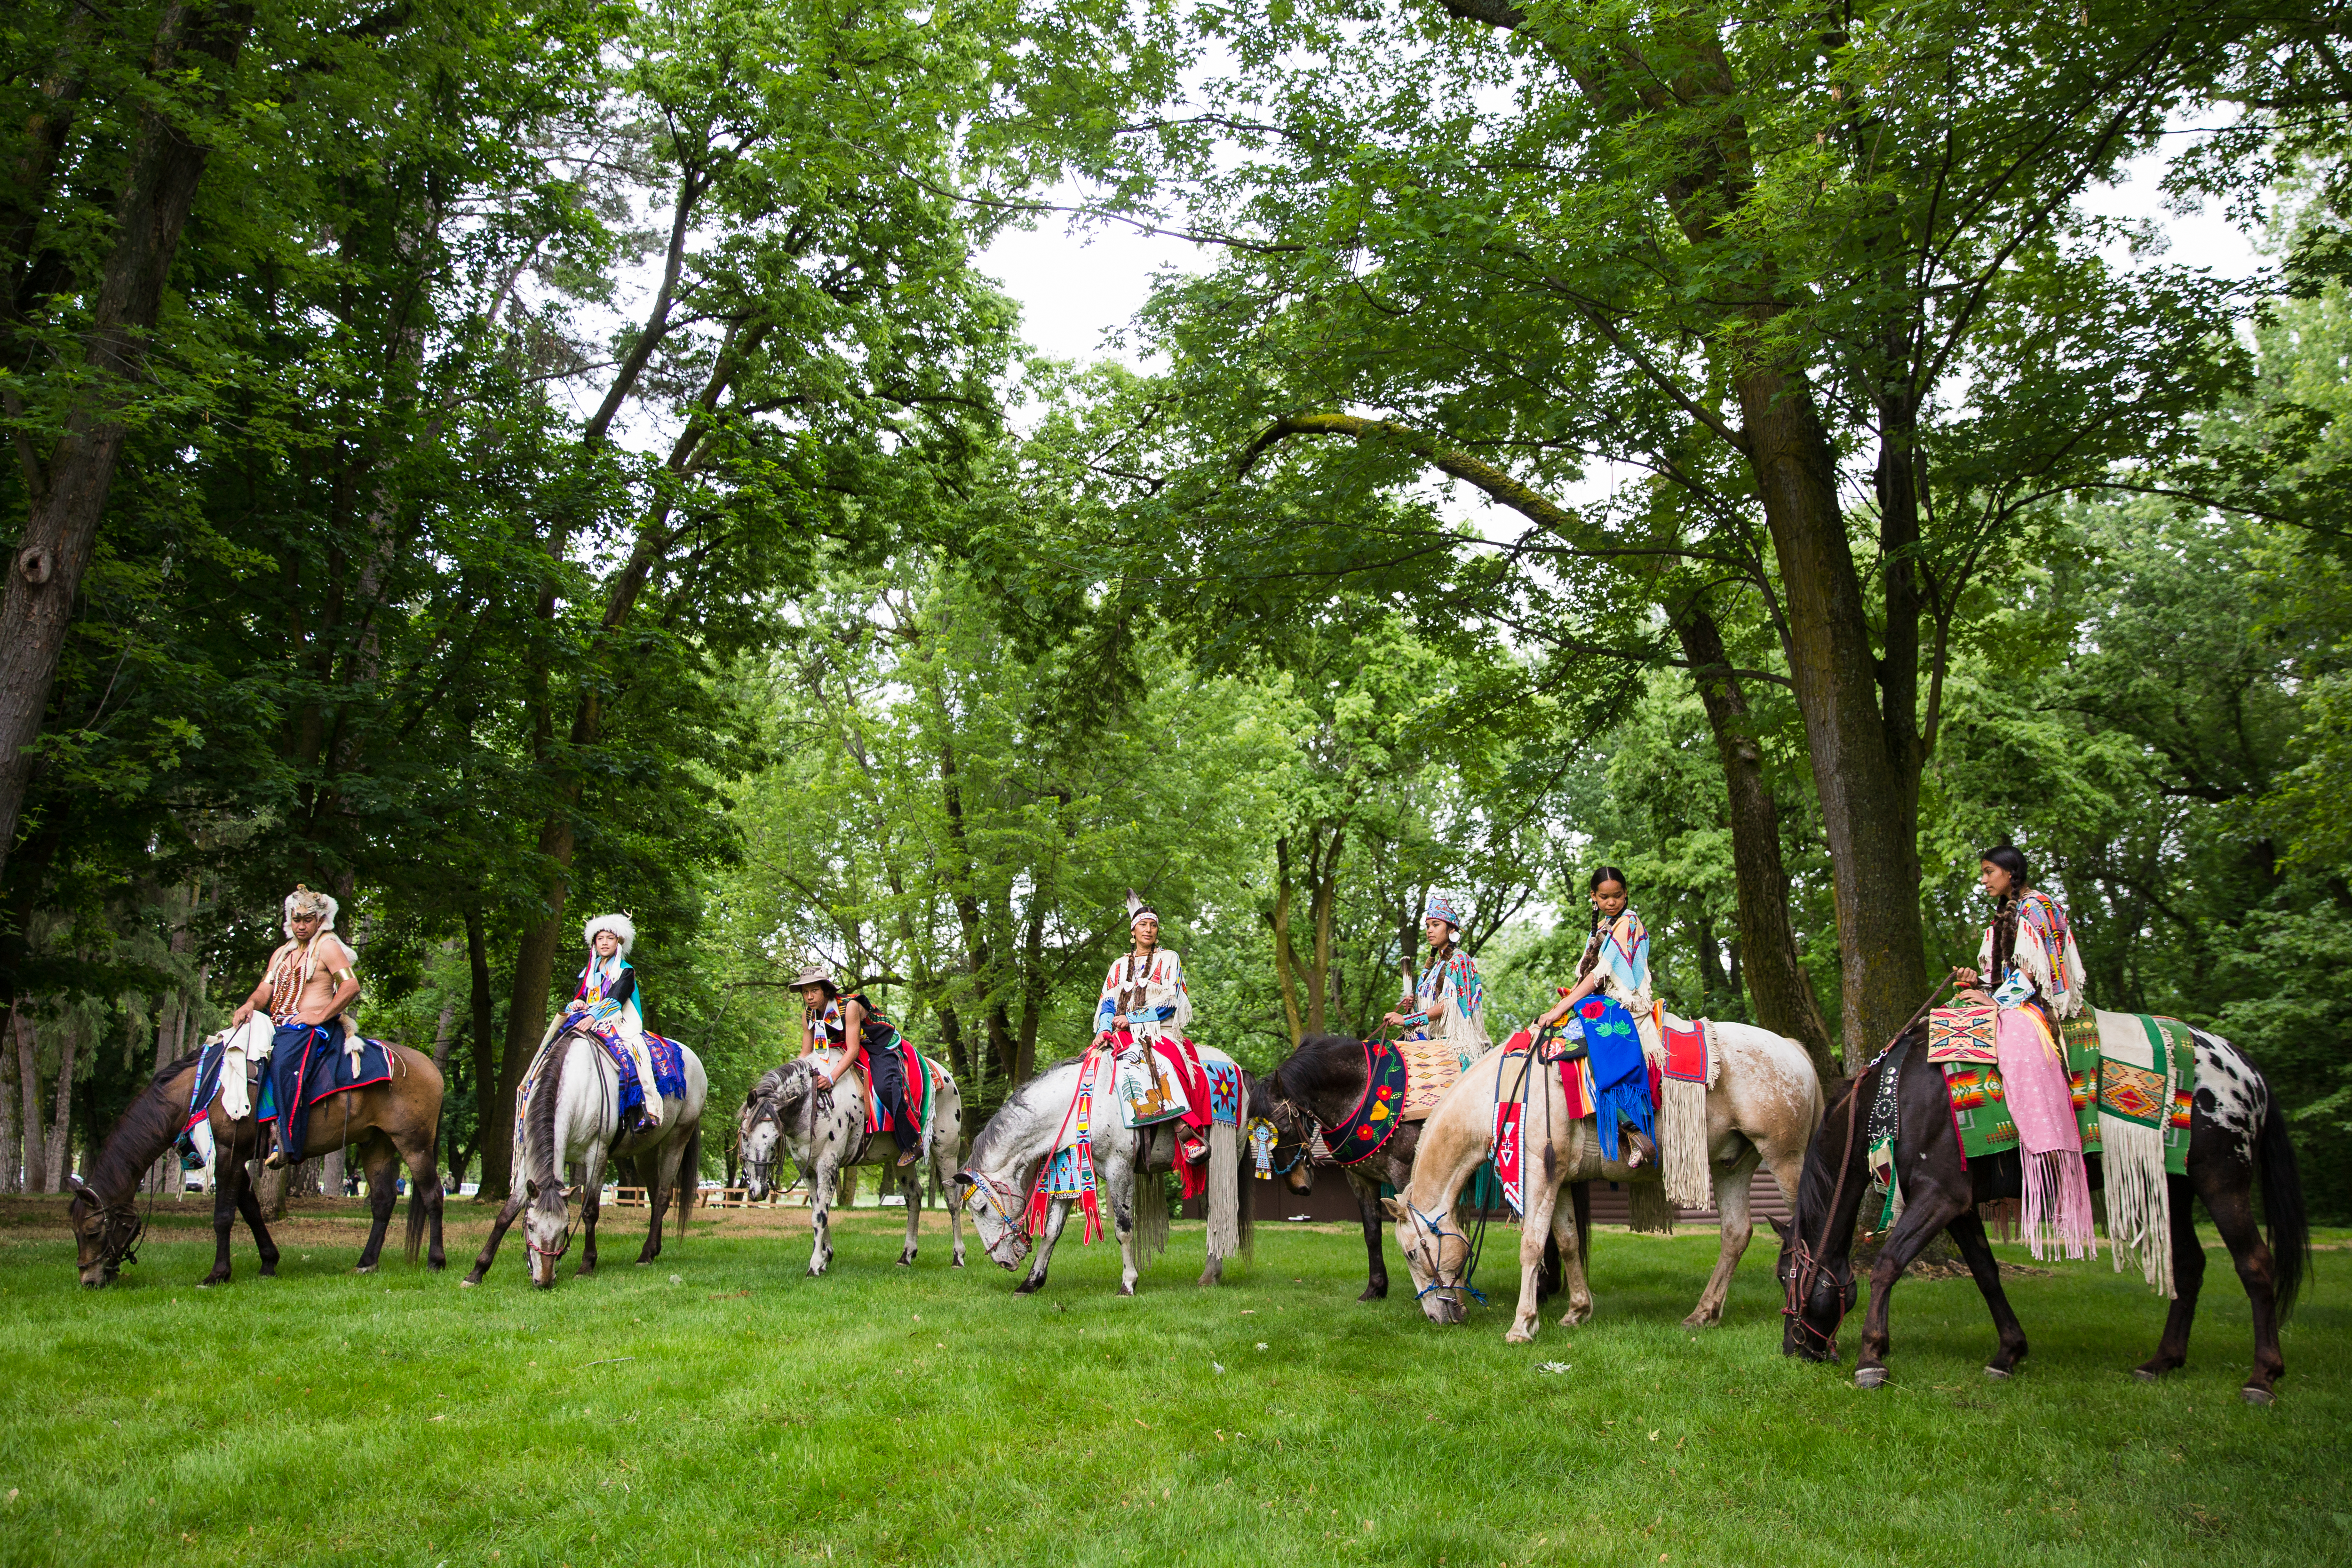 Seven horses and riders in traditional dress with green grass and trees surrounding them.